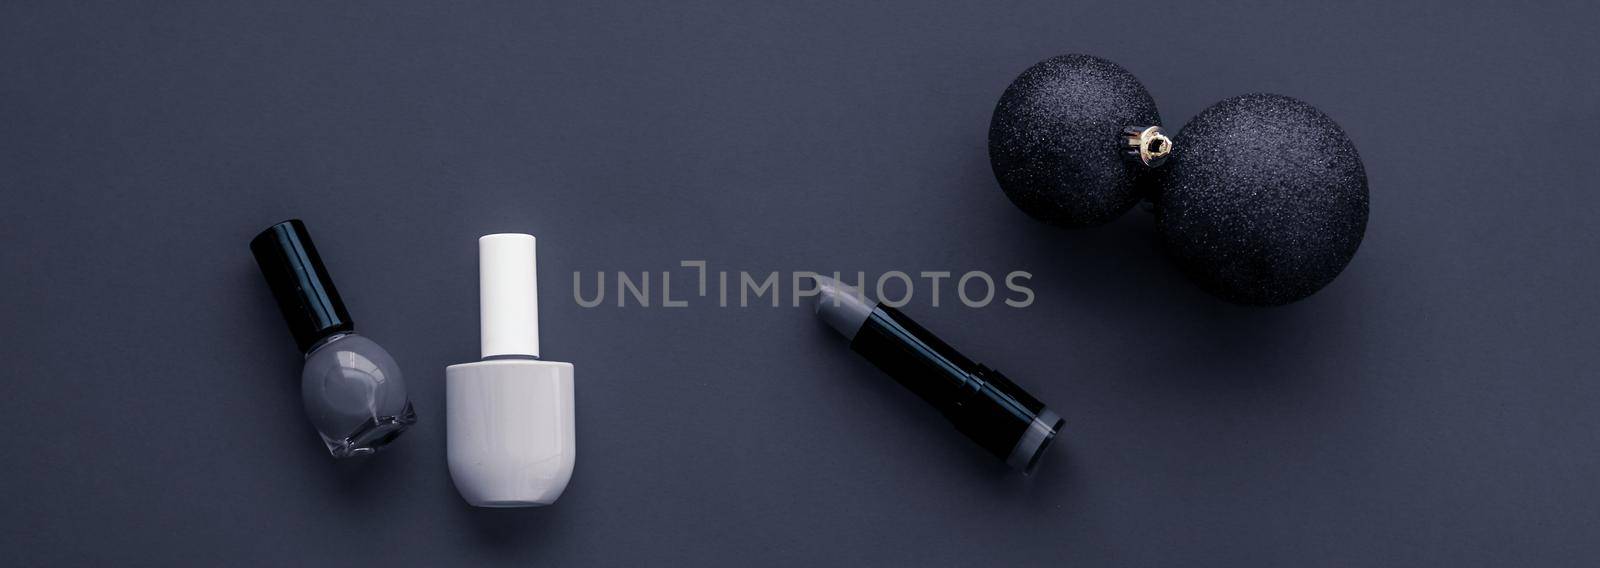 Make-up and cosmetics product set for beauty brand Christmas sale promotion, luxury black flatlay background as holiday design by Anneleven